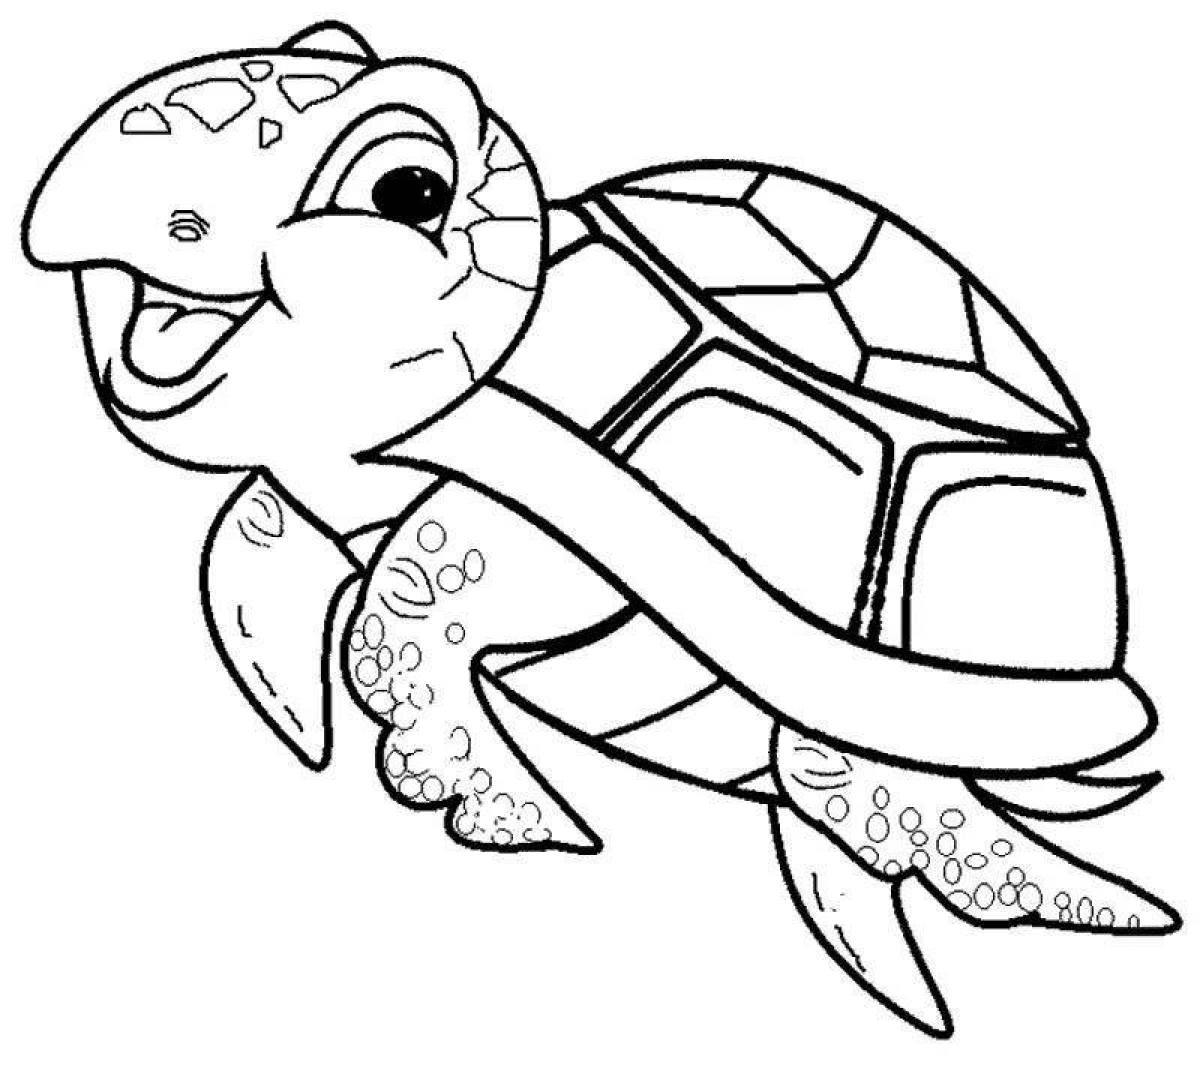 A funny turtle coloring book for 3-4 year olds